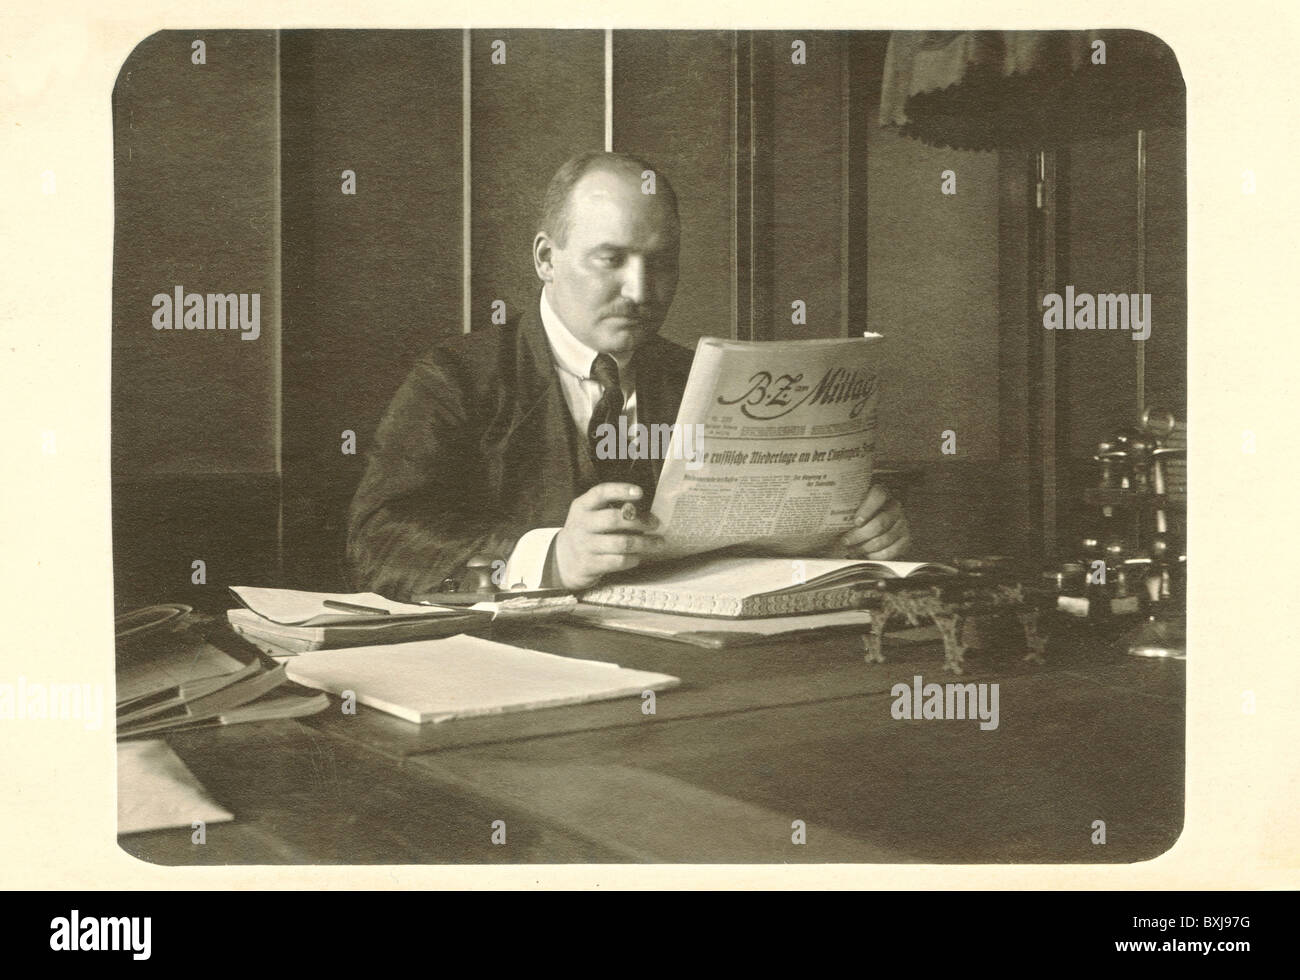 press / media, man reading newspaper (B.Z. am Mittag) in his office, Berlin, Germany, 1915, Additional-Rights-Clearences-Not Available Stock Photo